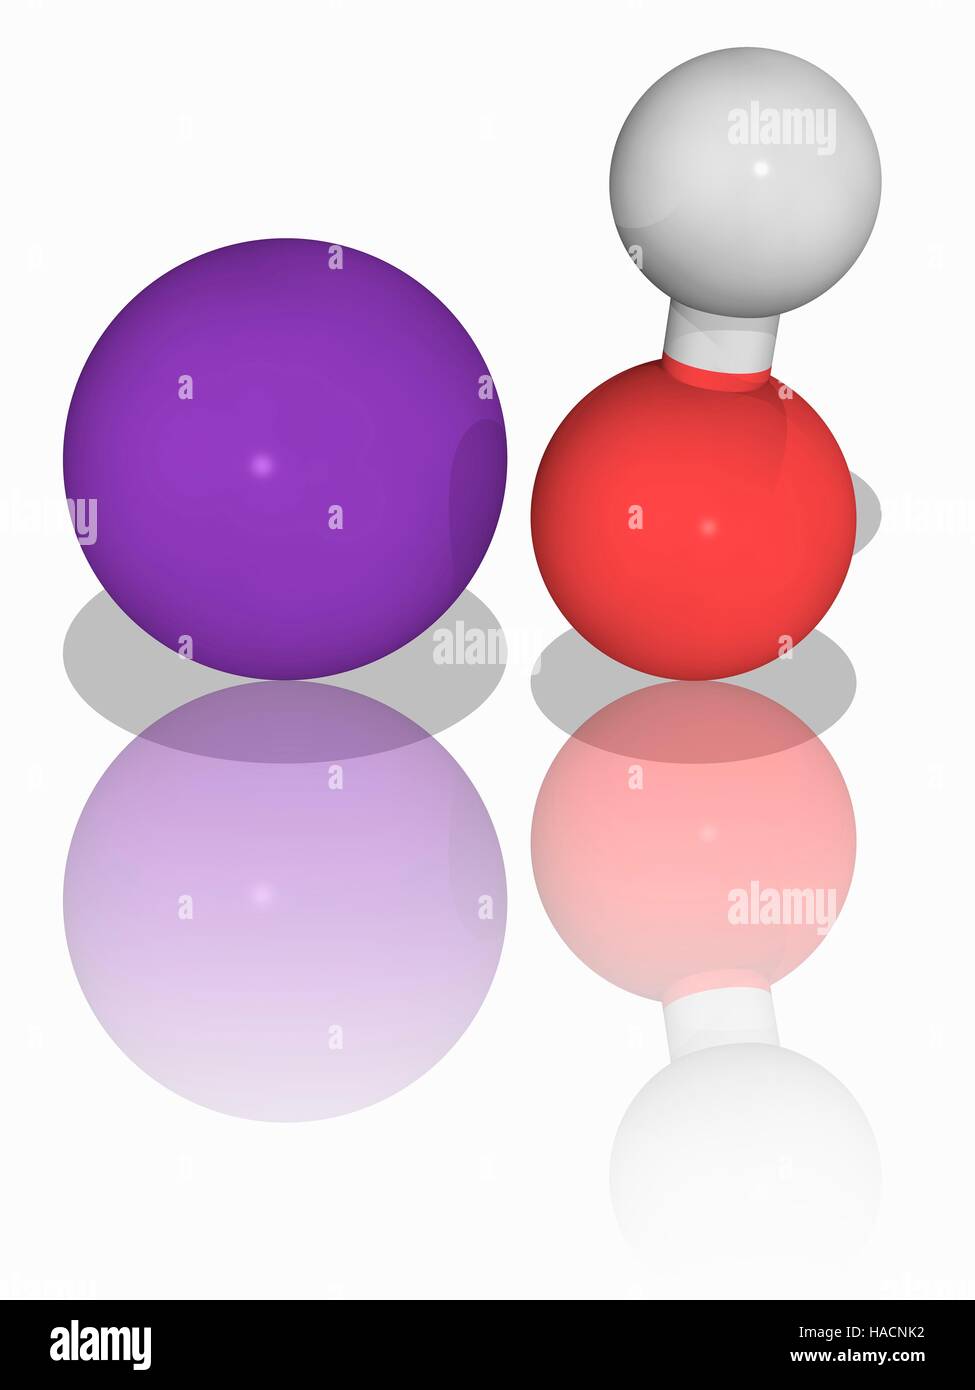 Potassium hydroxide. Molecular model of the inorganic compound potassium hydroxide (KOH), used as a precursor to most soft and liquid soaps as well as of numerous potassium-containing chemicals. Atoms are represented as spheres and are colour-coded: hydrogen (white), oxygen (red) and potassium (violet). Illustration. Stock Photo